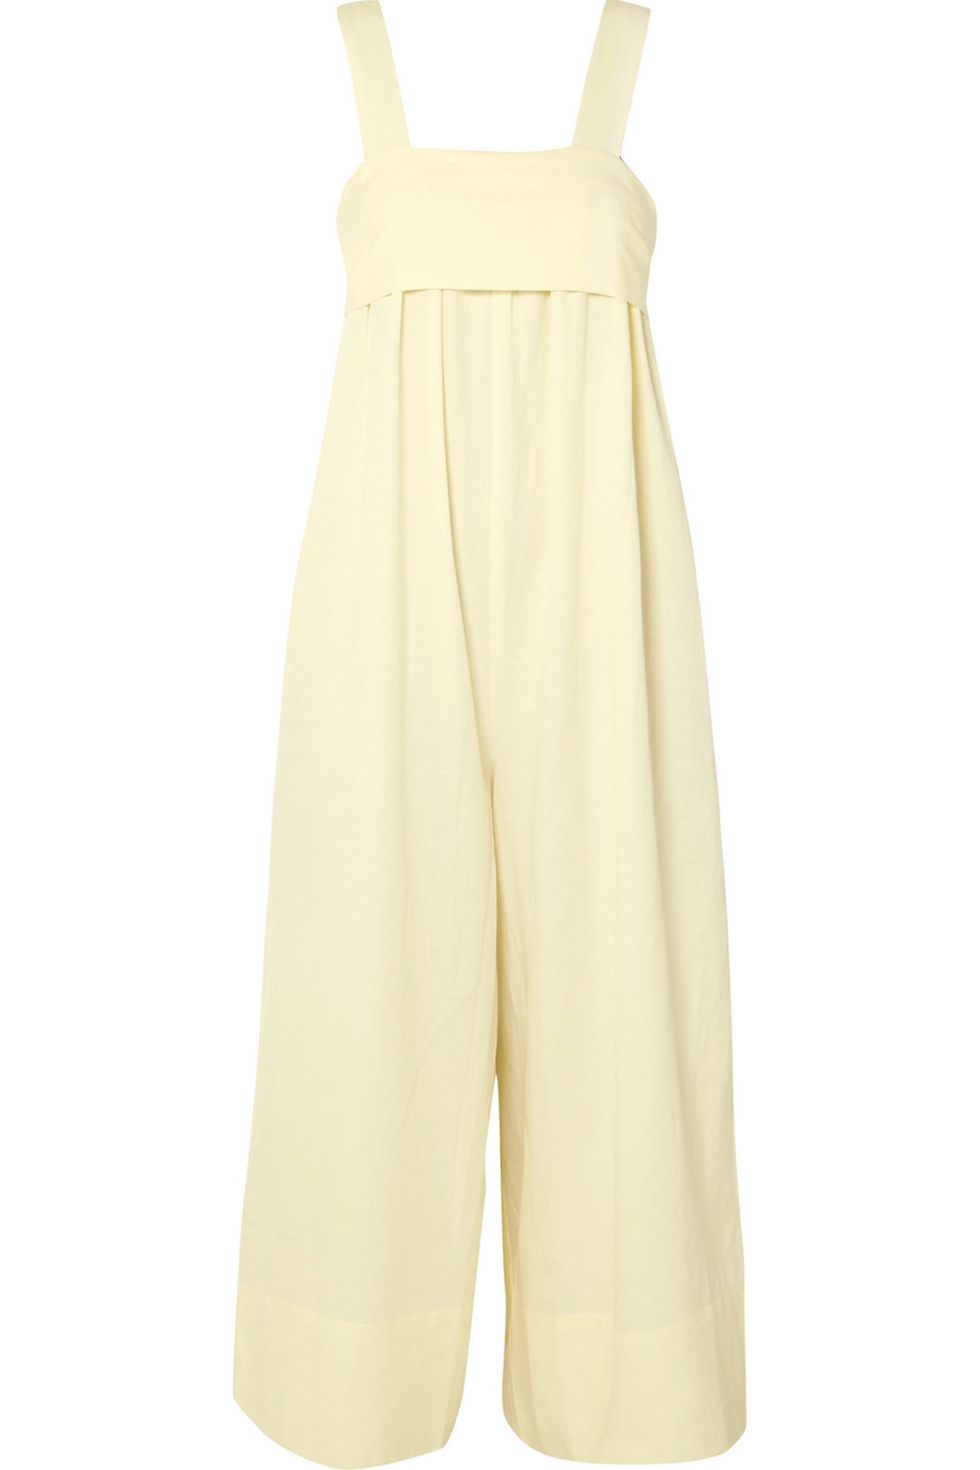 Clothing, White, Yellow, One-piece garment, Dress, Trousers, Beige, Overall, 